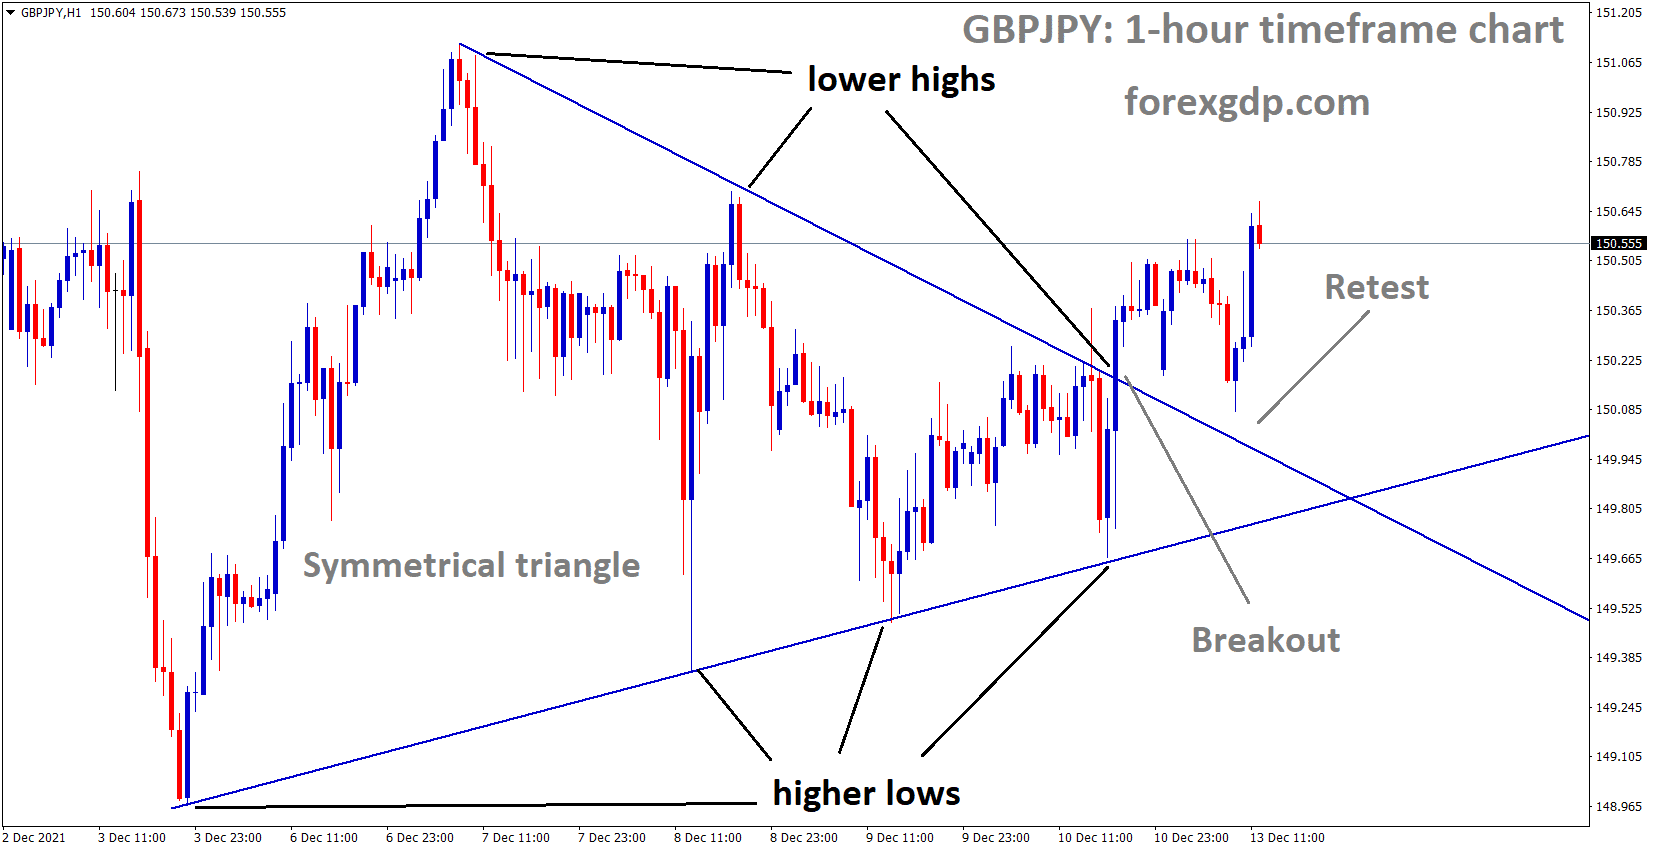 GBPJPY has broken the Symmetrical triangle pattern and the market retested the triangle pattern and rebounded from the higher low area.